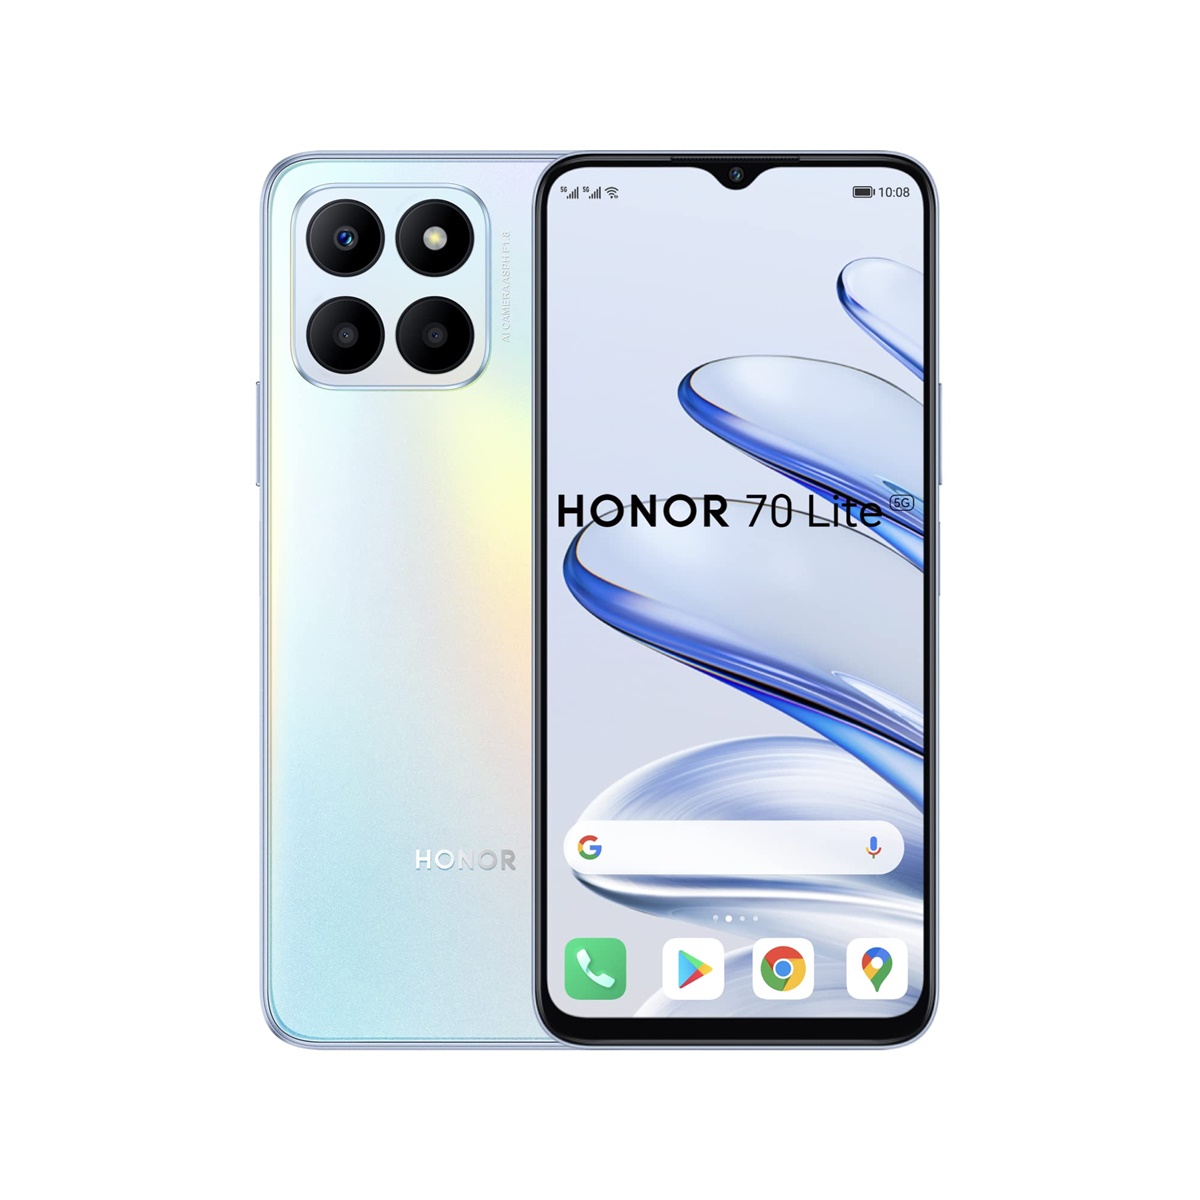 Honor 70 Lite Released 2023, March 31, 194g, 8.7mm thickness, Android 12, Magic UI 6.1, 128GB storage, Unspecified, 6.5"720x1600 pixels, 50MP1080p, 4GB RAMSnapdragon 480+ 5G, 5000mAh23W